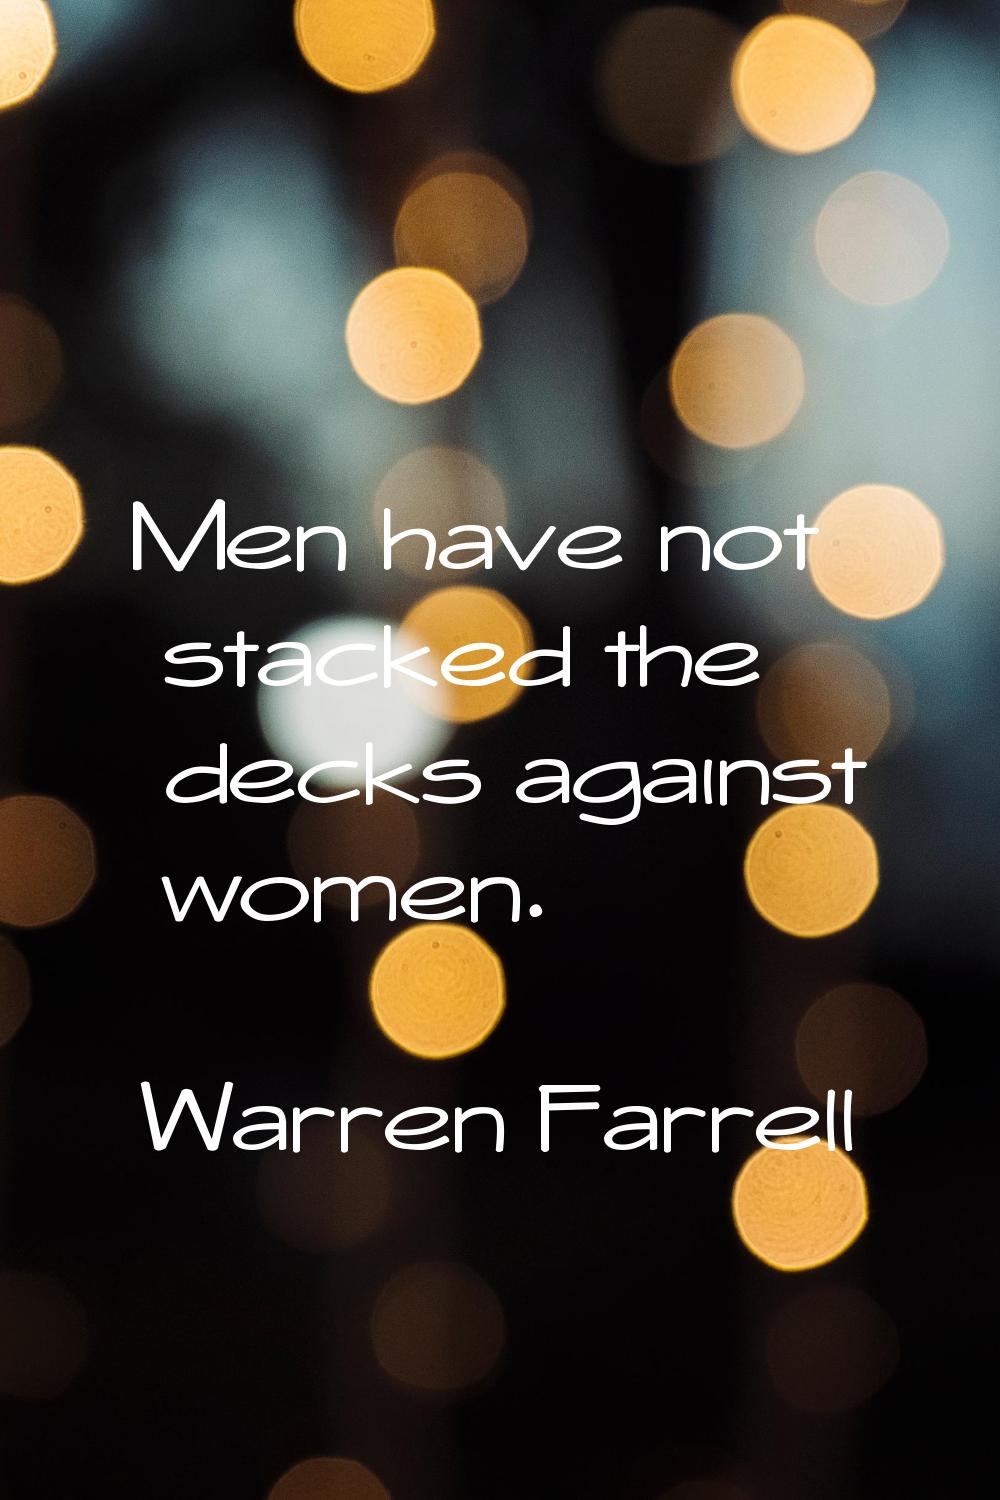 Men have not stacked the decks against women.